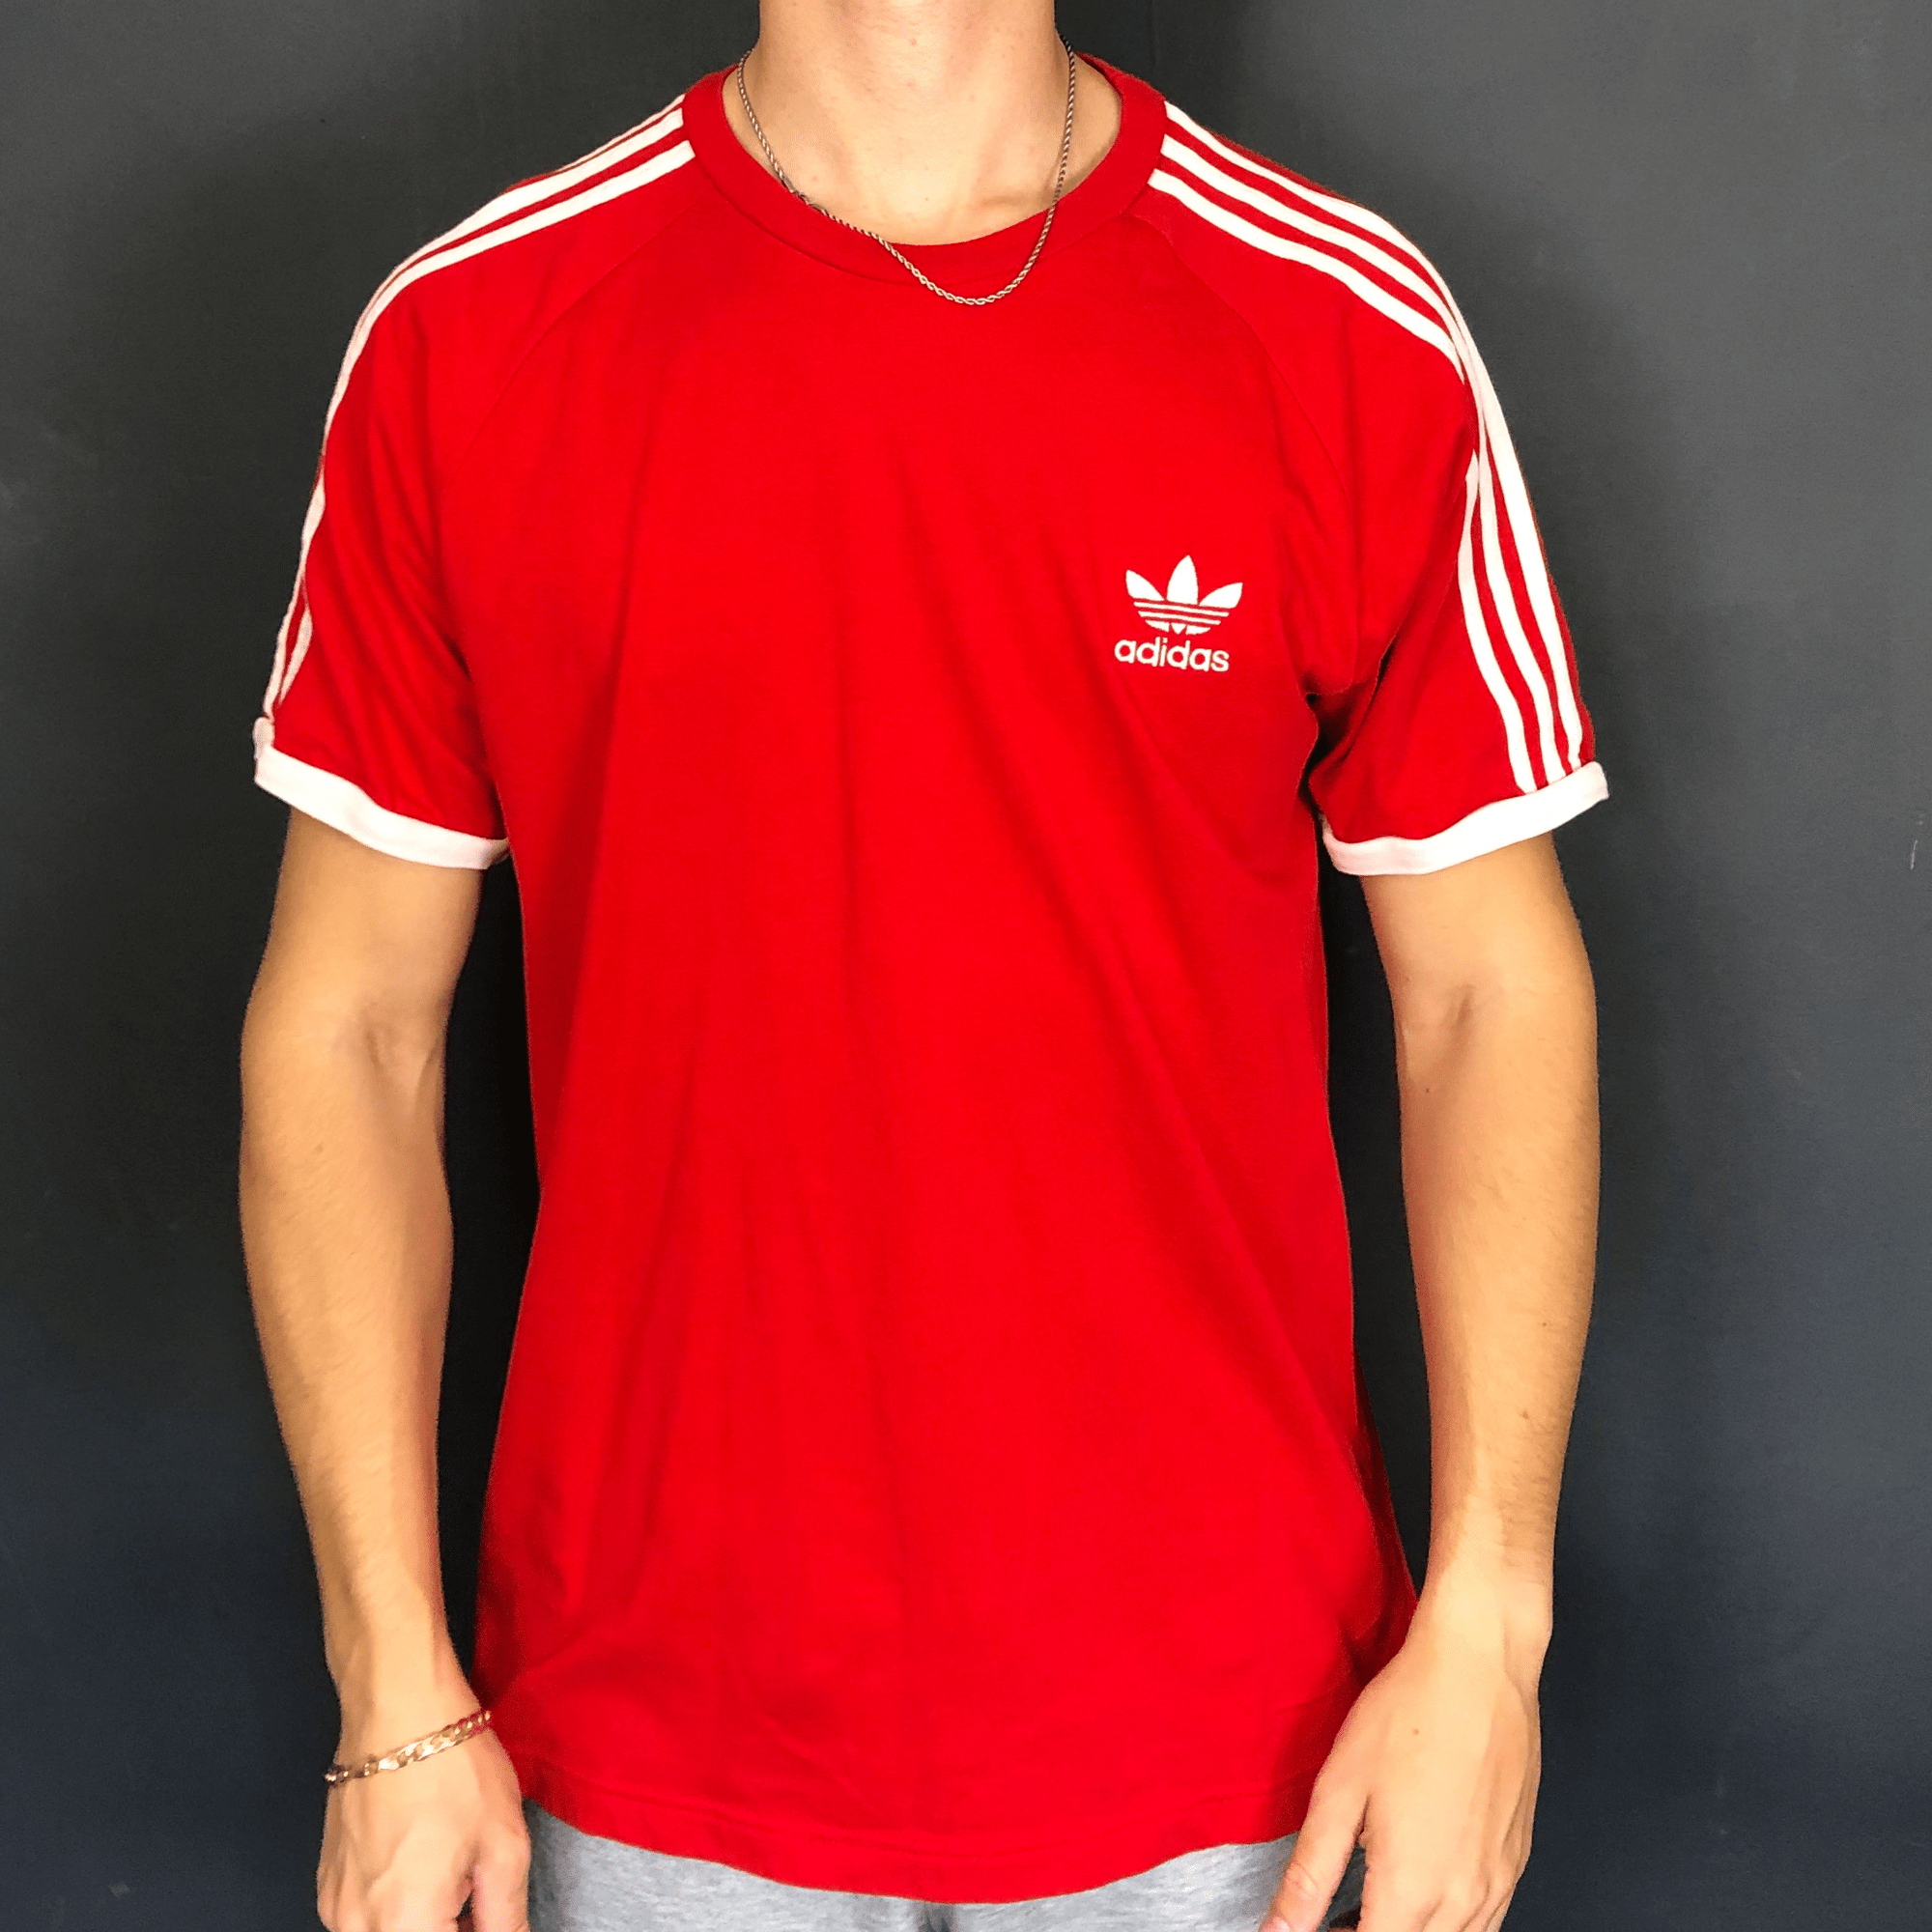 VINTAGE ADIDAS Originals T-SHIRT IN RED & WHITE - LARGE - Vintique Clothing